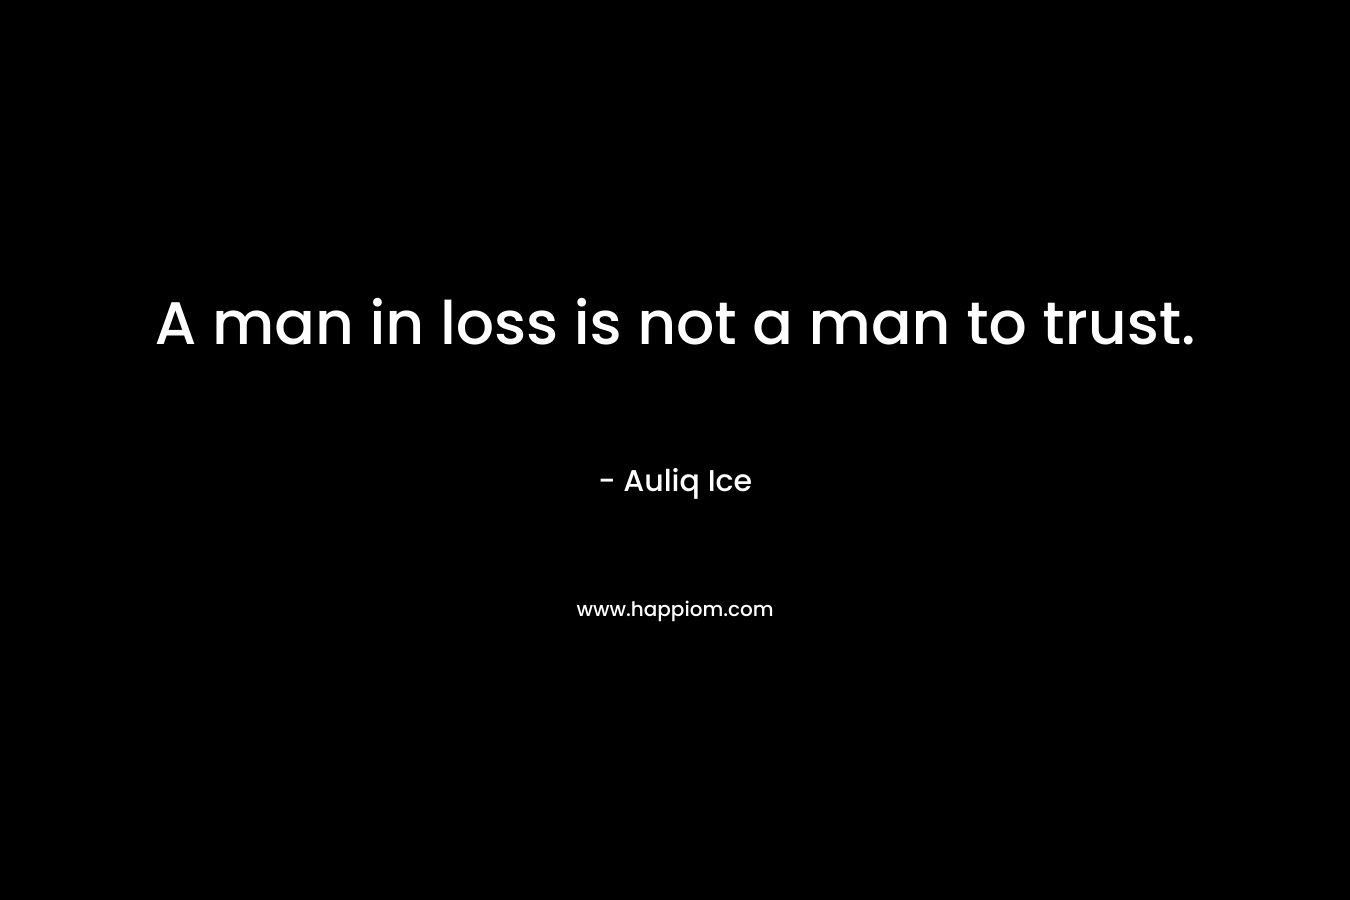 A man in loss is not a man to trust.